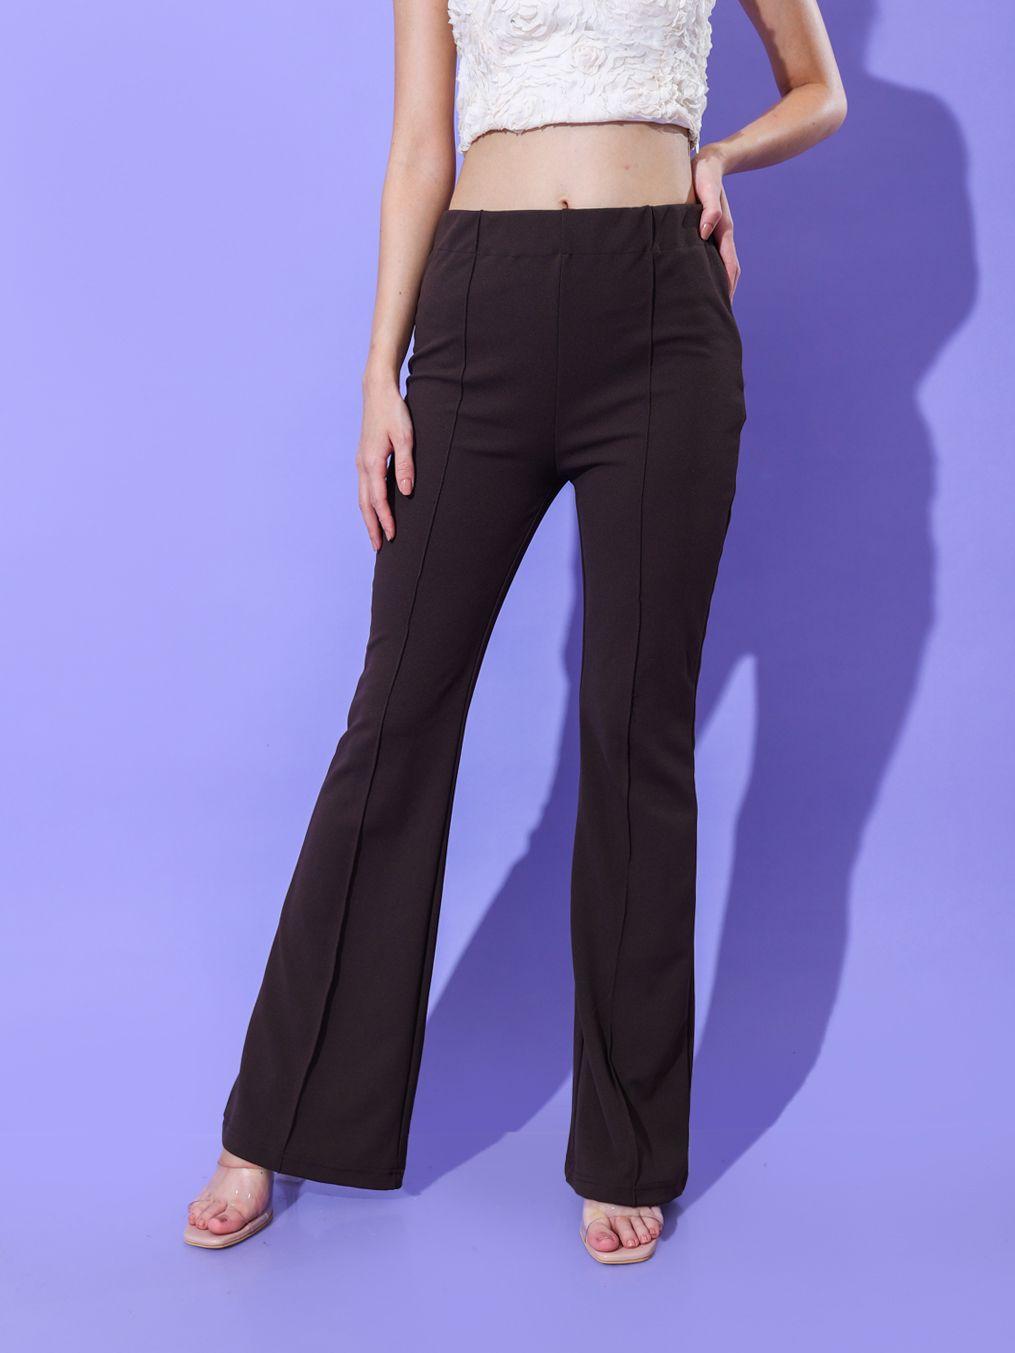 stylecast x hersheinbox high-rise boot cut trousers